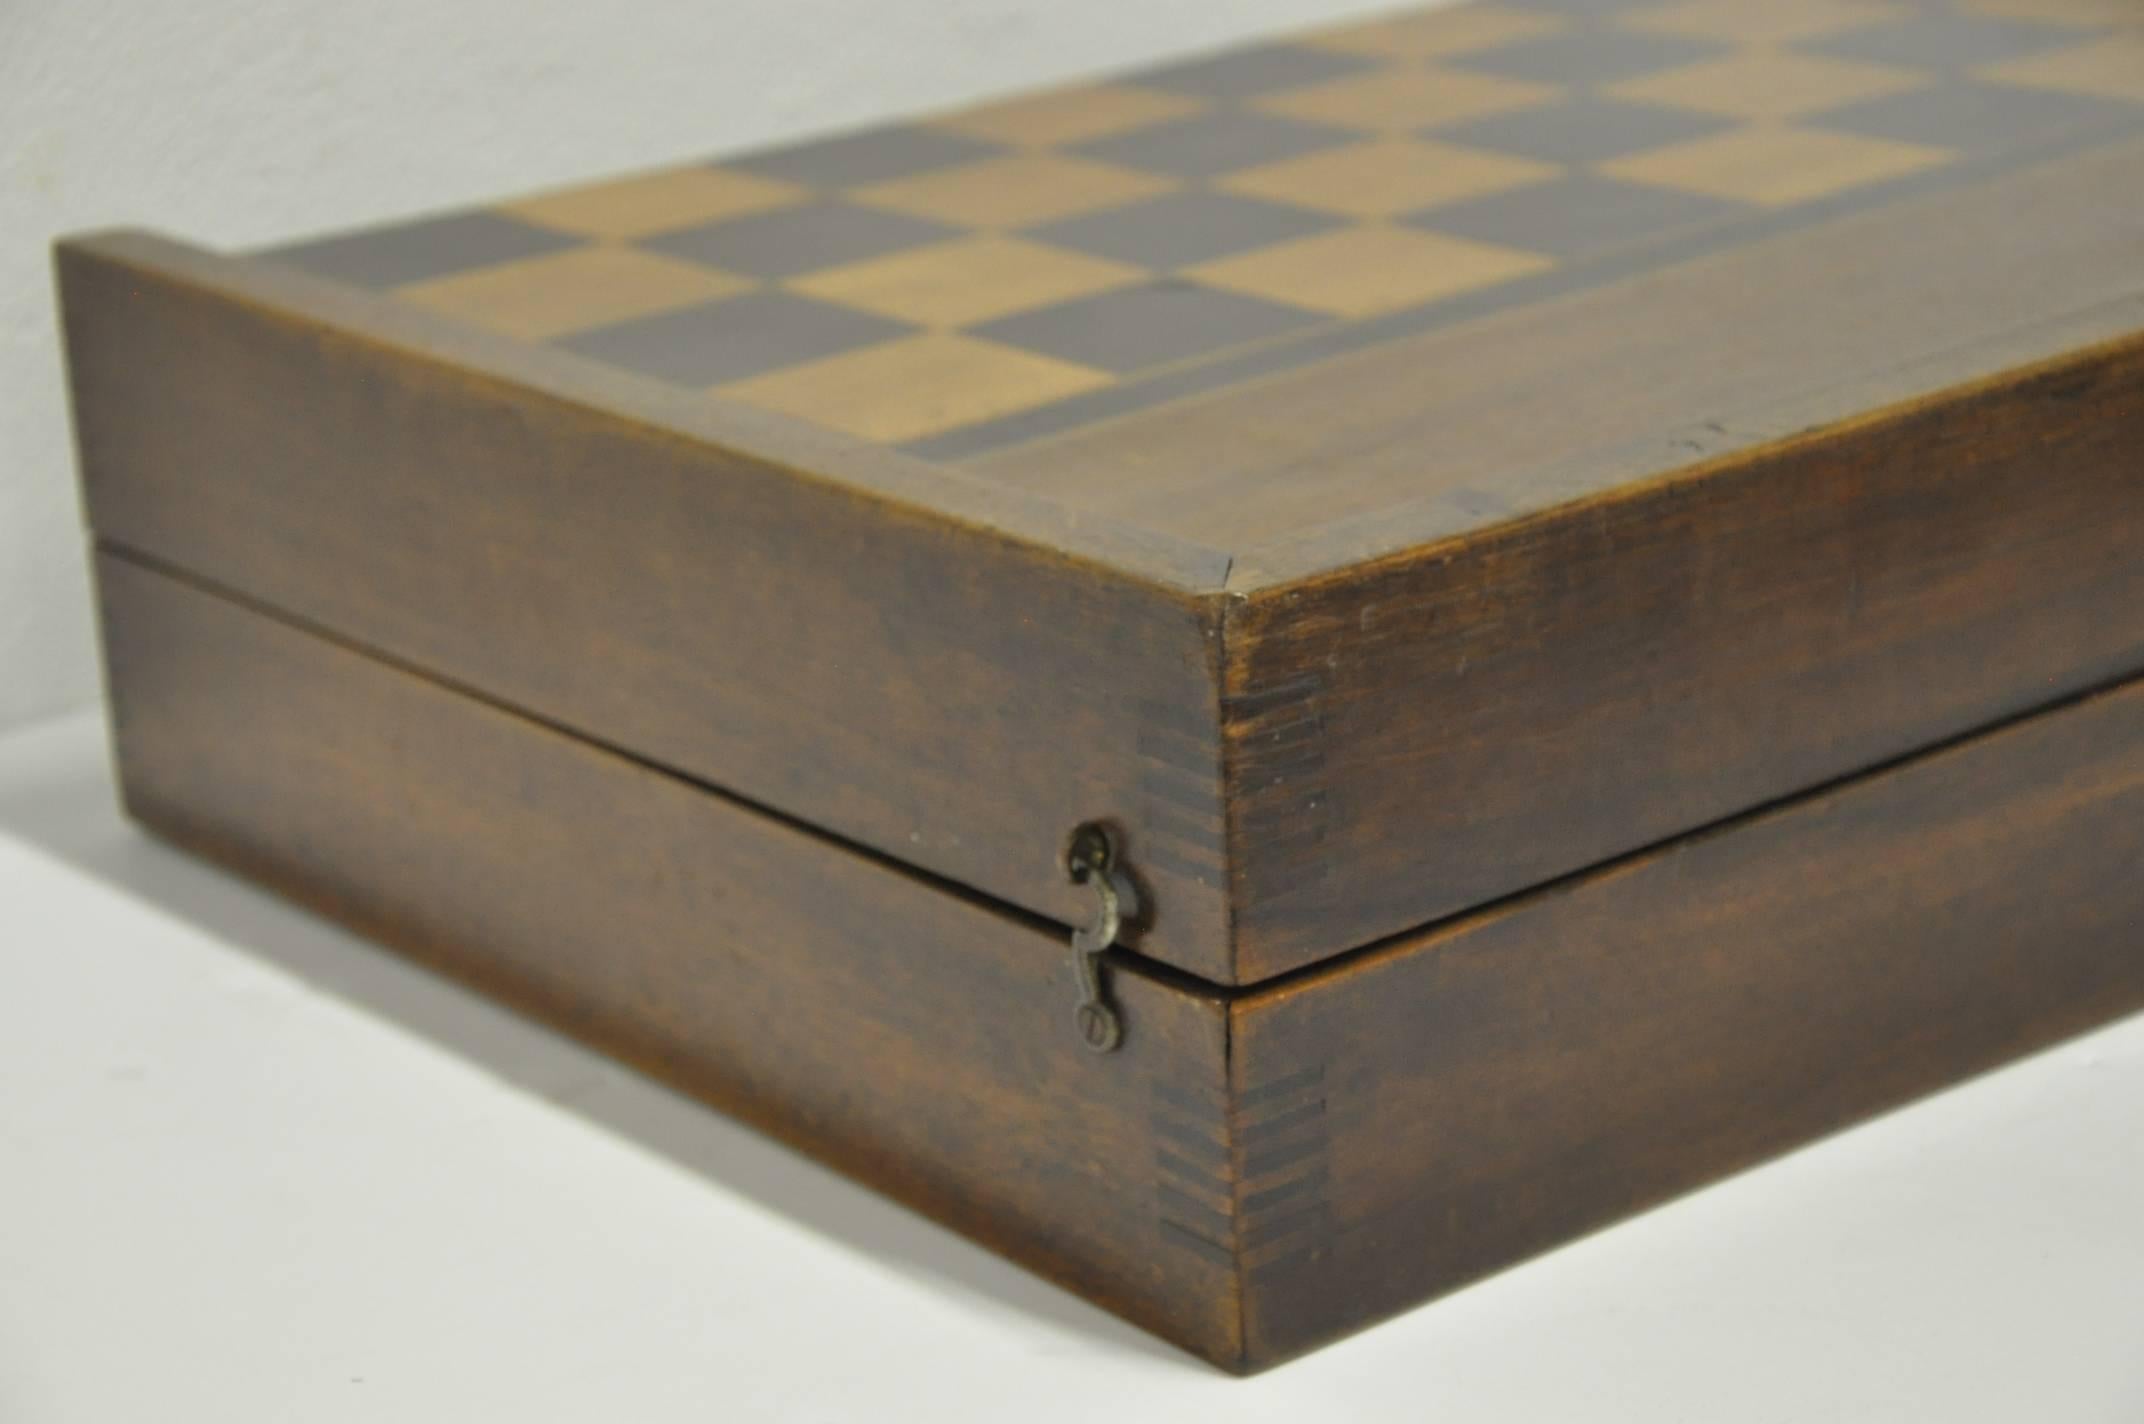 Leather 19th Century, French Backgammon and Checkers Game Signed Arthaud, Paris